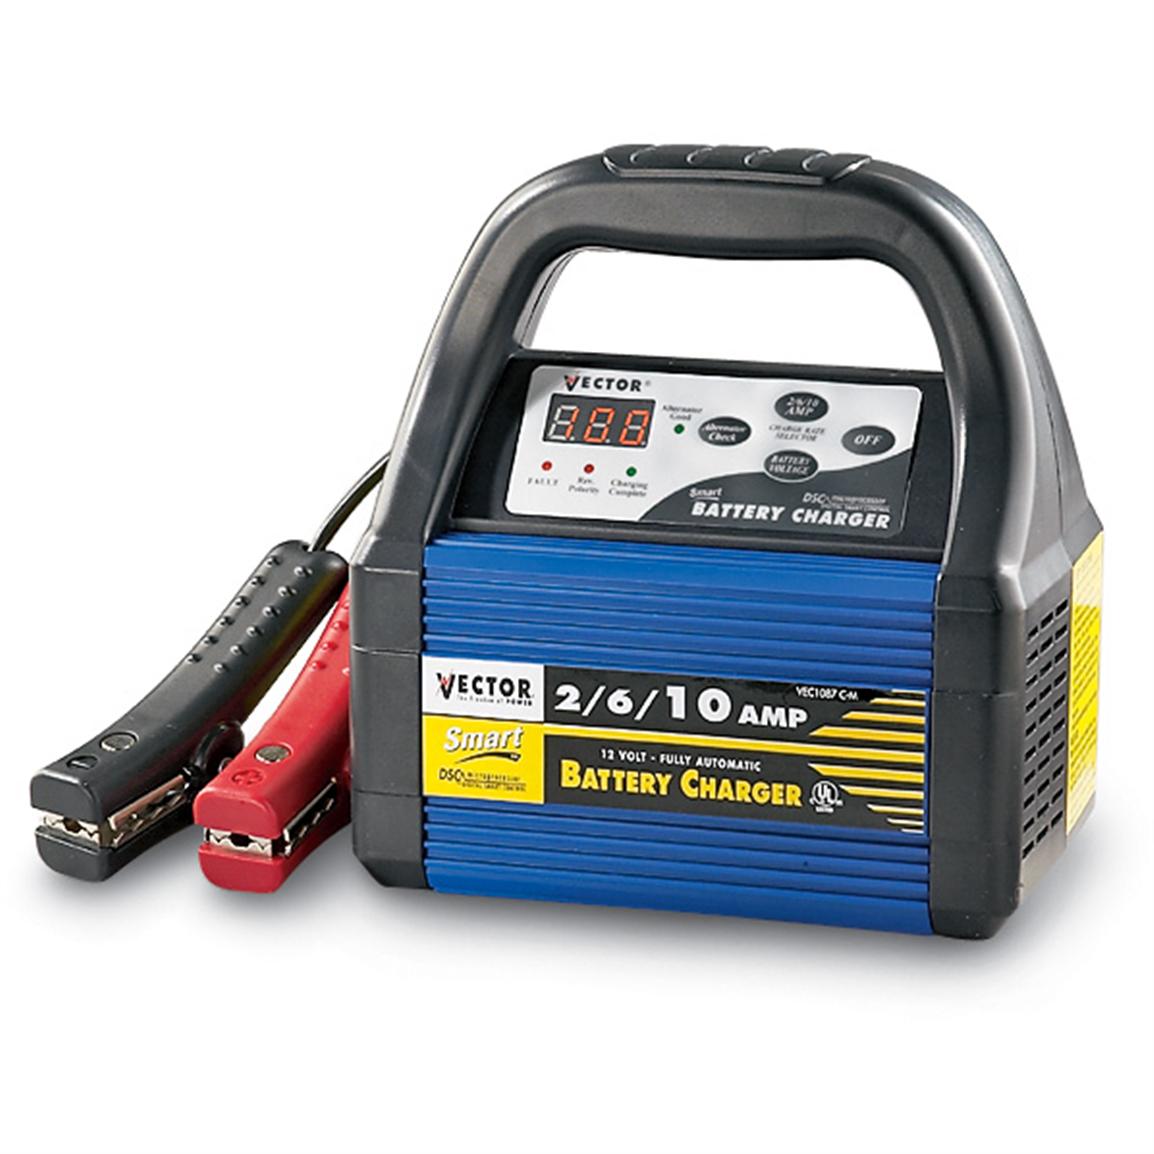 Vector® 2 / 6 / 10 amp 12V Deep Cycle Battery Charger - 92231, Chargers